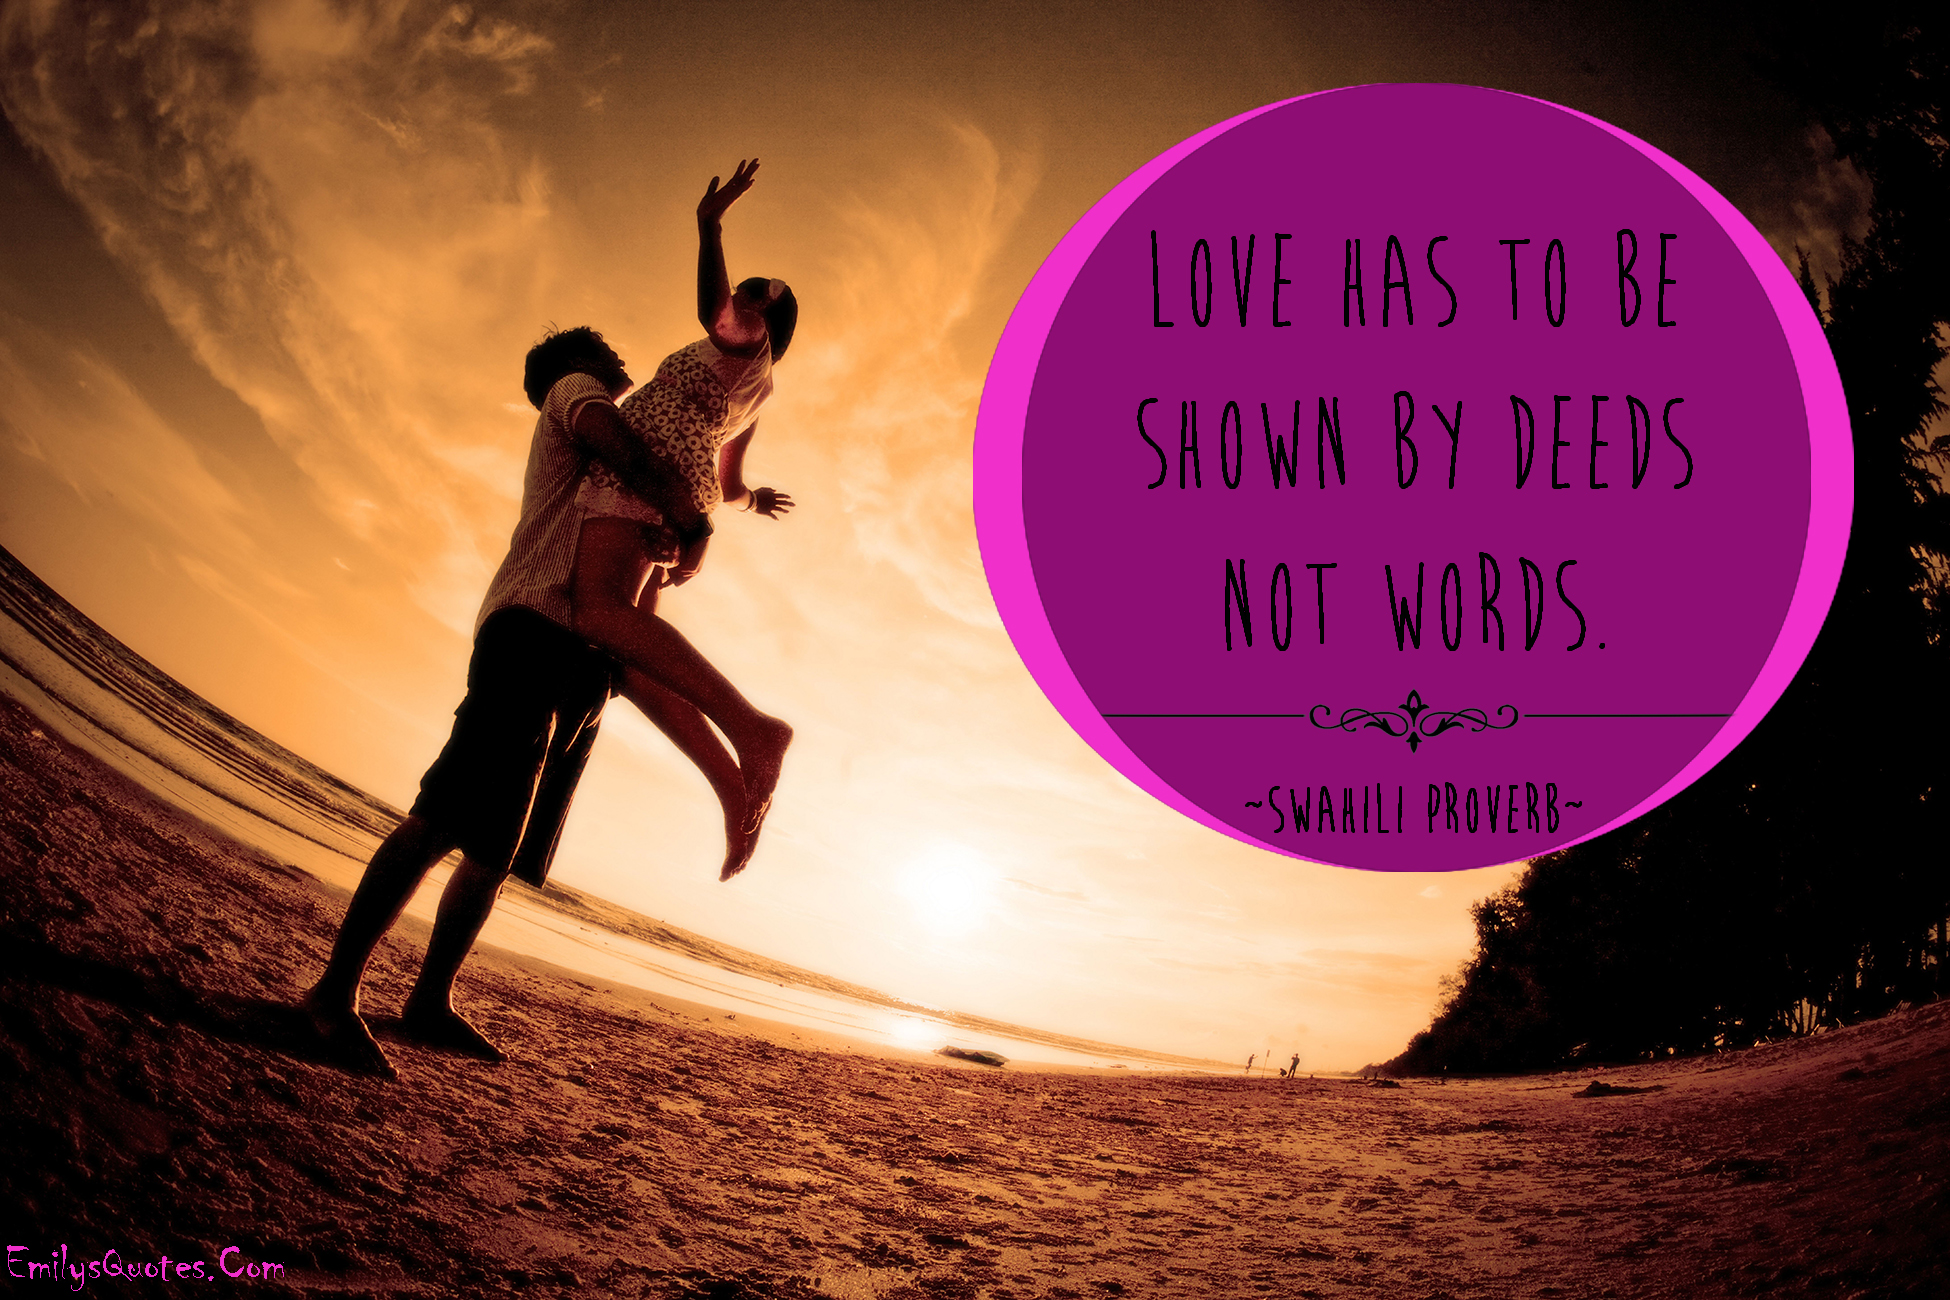 Love has to be shown by deeds not words